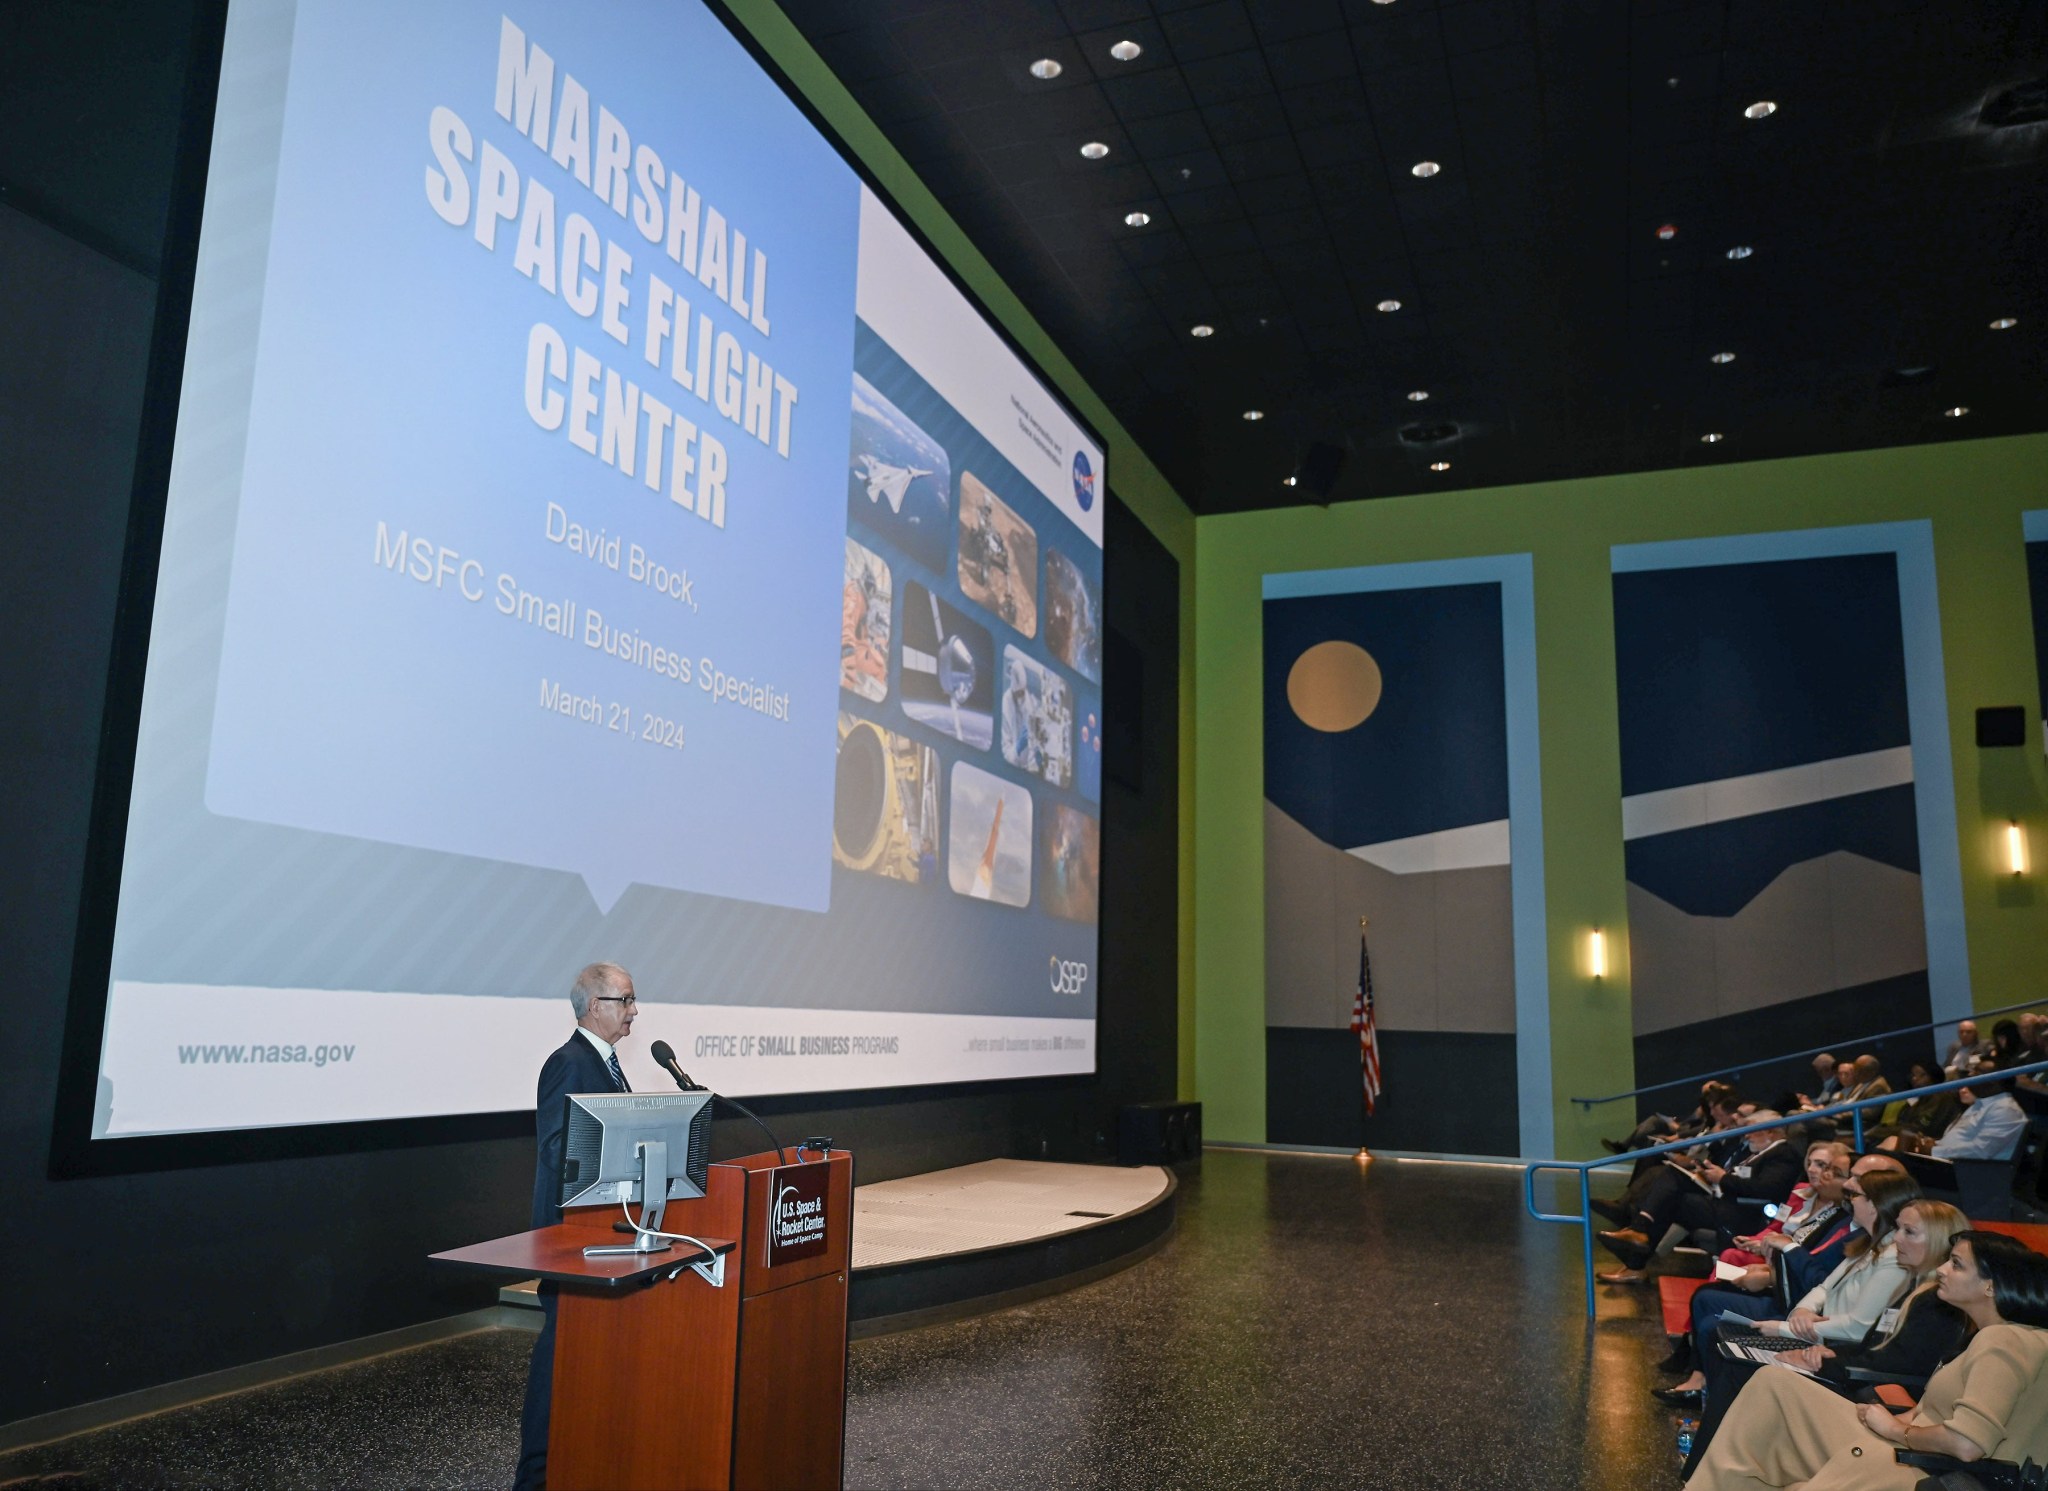 David Brock, small business specialist at NASA's Marshall Space Flight Center, talks to attendees at the 37th Small Business Alliance meeting March 21.